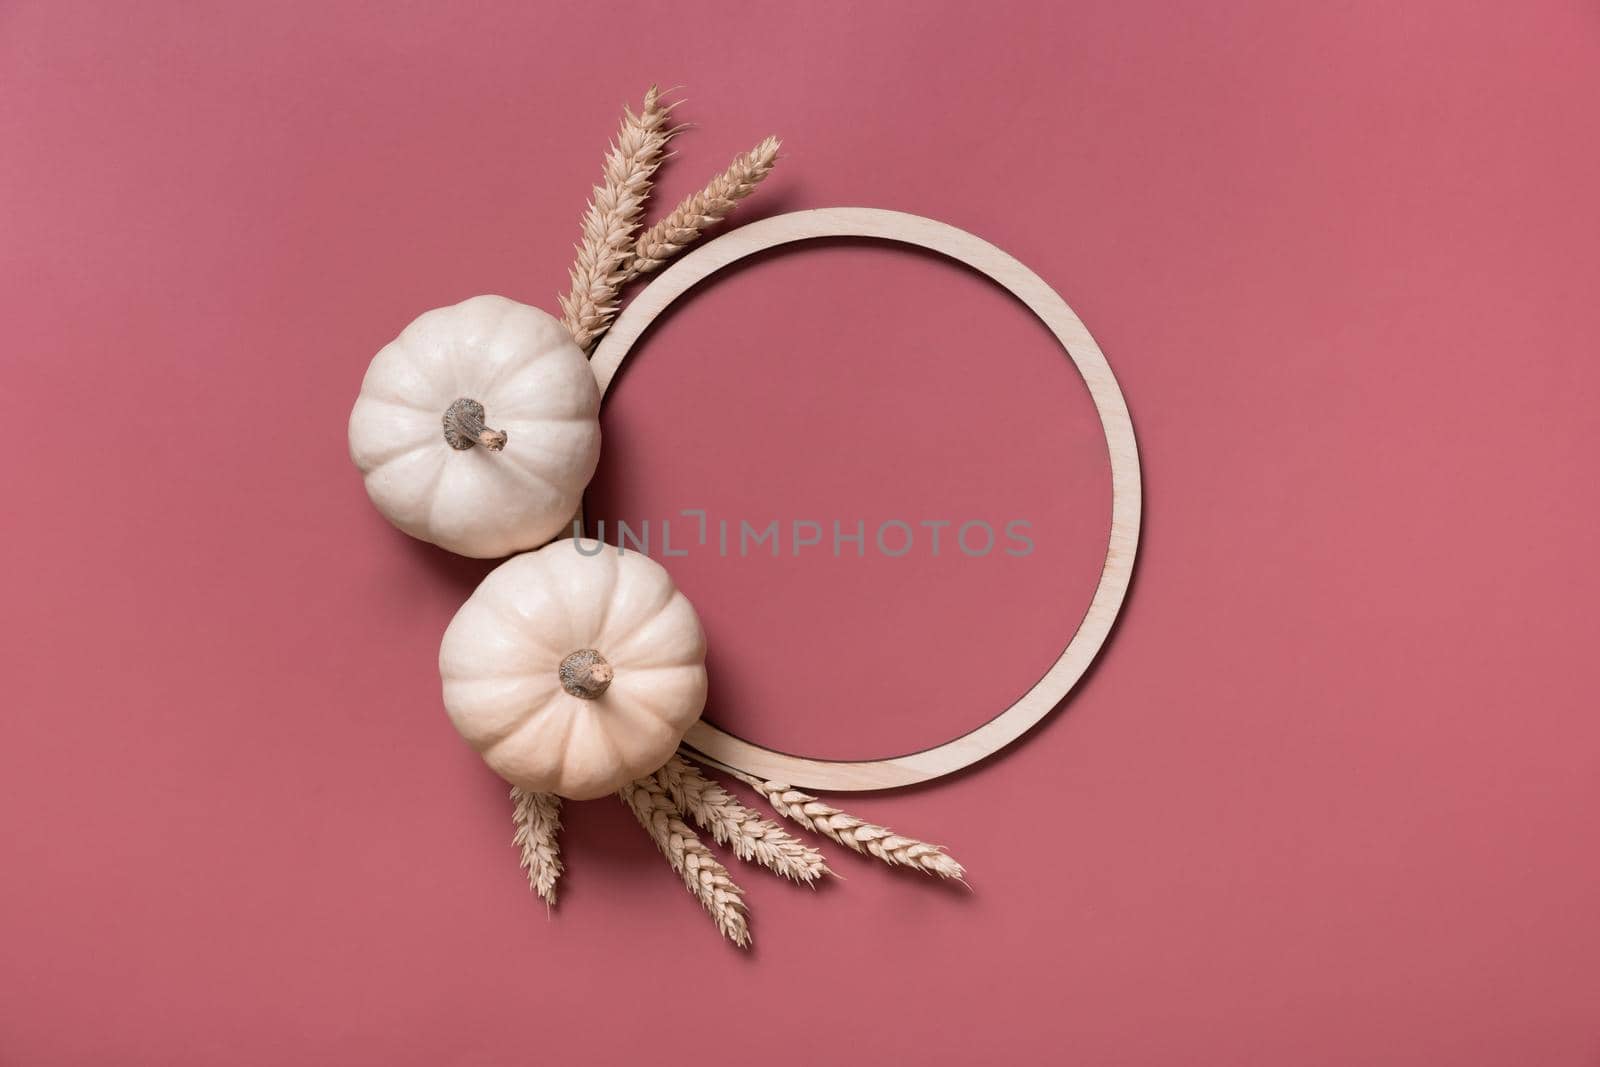 Decorative pumpkins and wooden frame for text, autumn themed blank top view, flat lay.